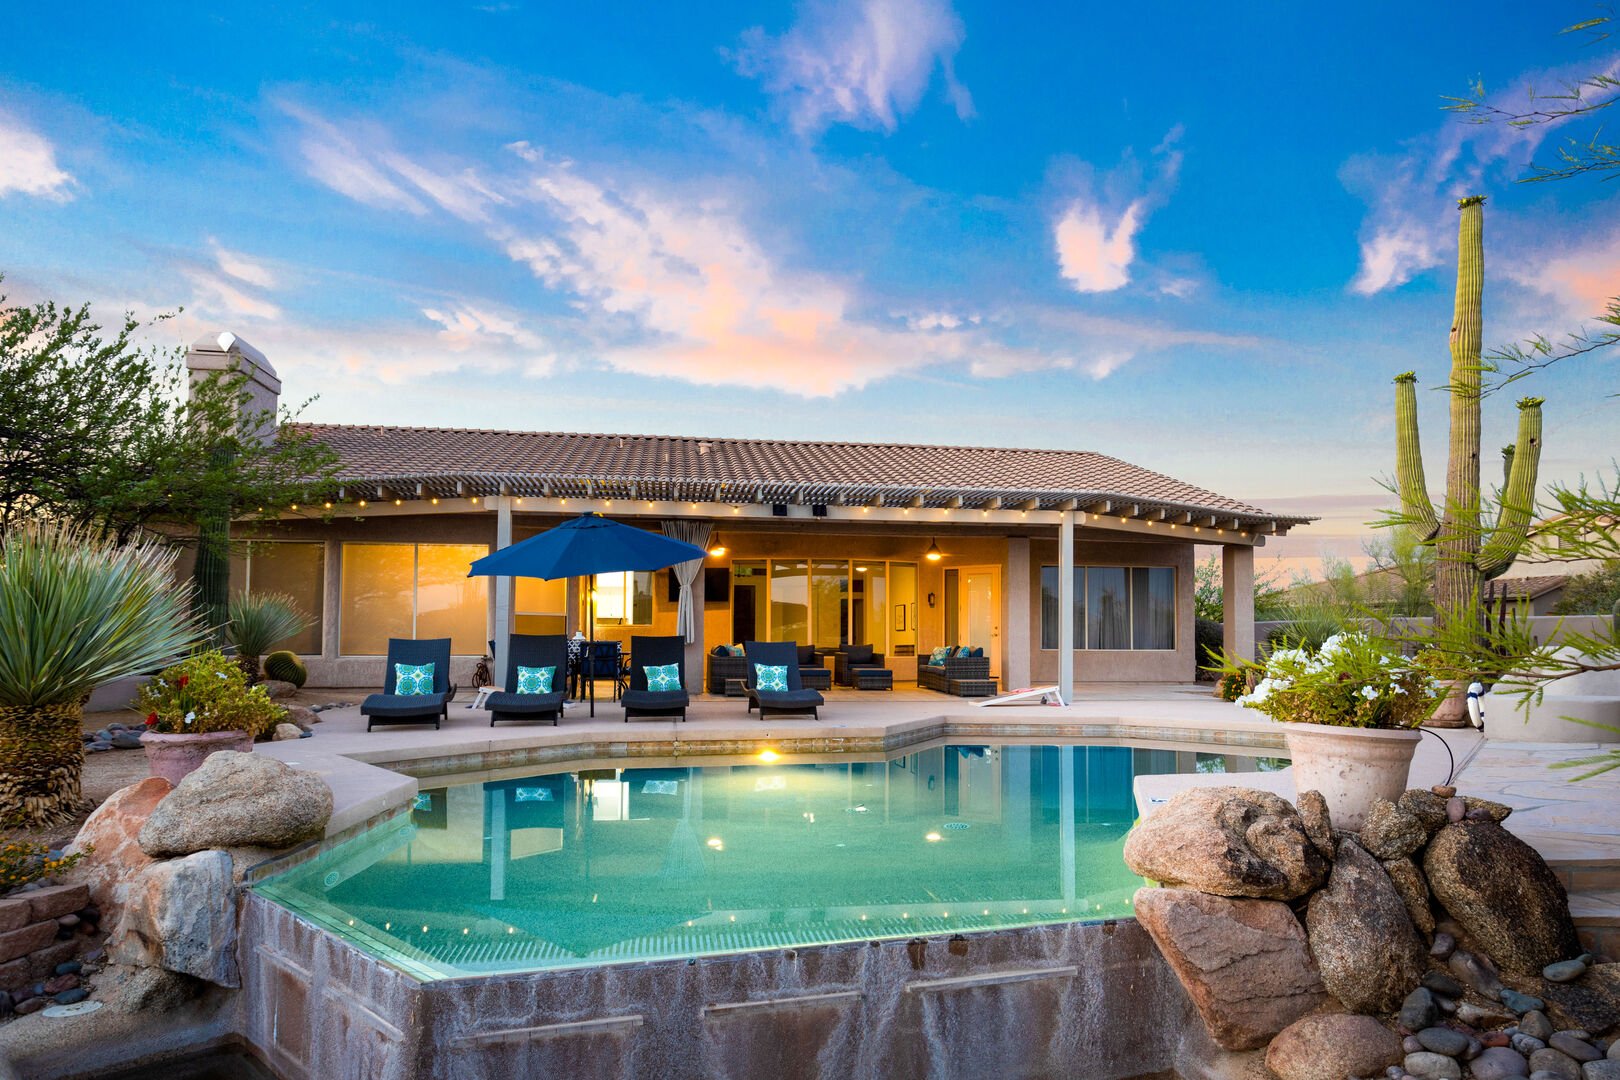 Browse Our Selection of North Scottsdale Rentals